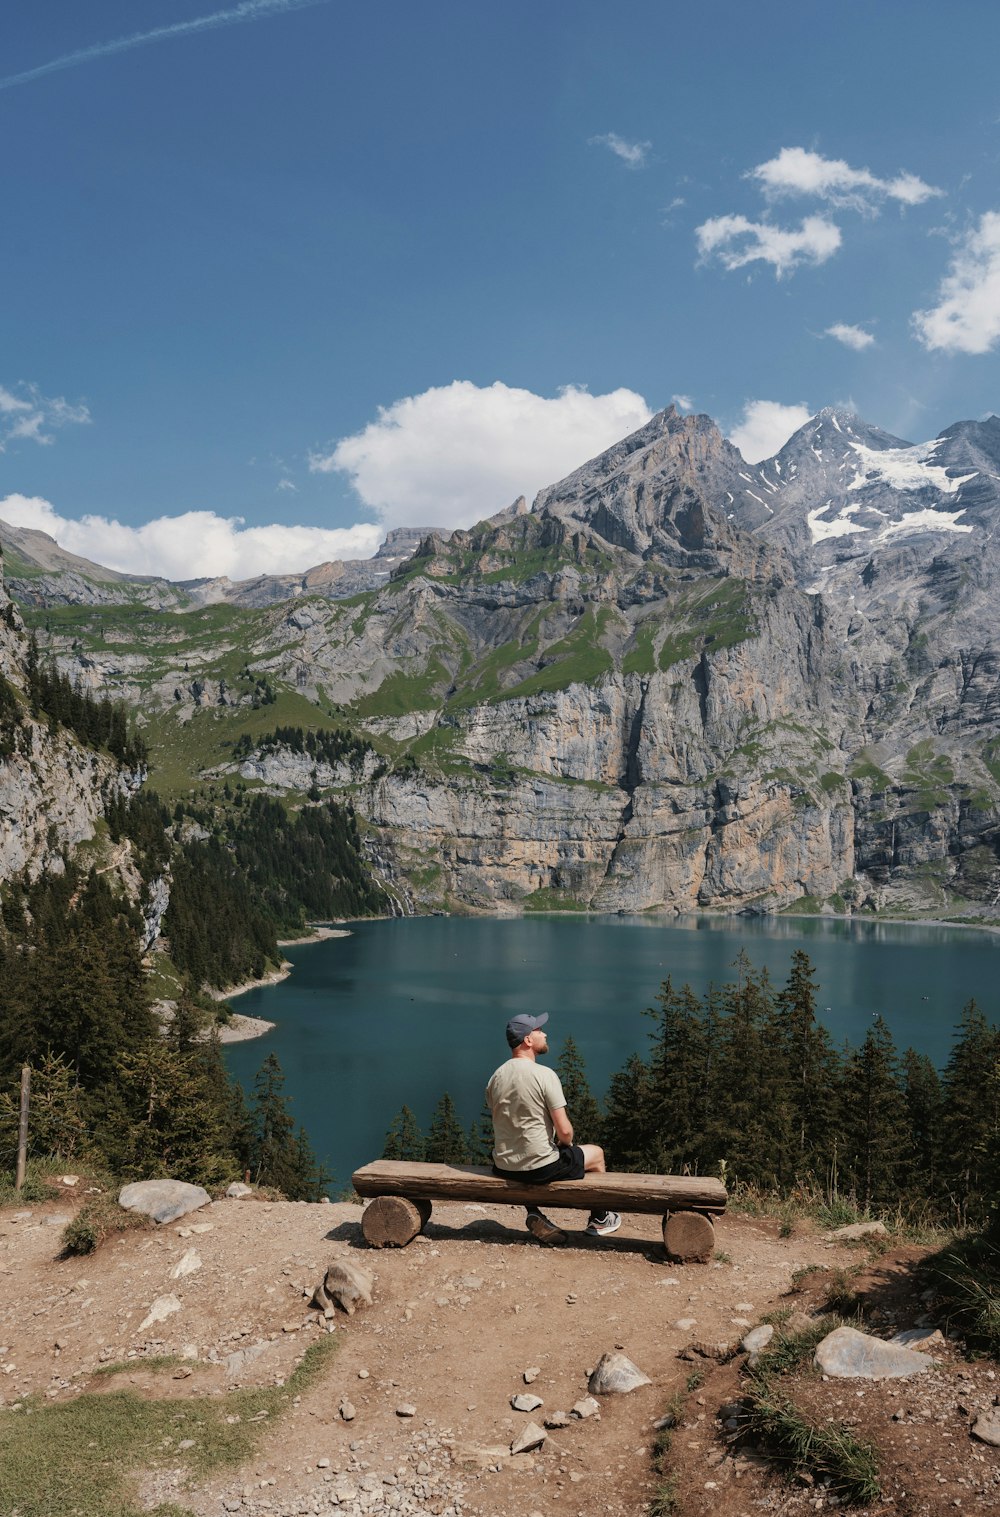 a man sitting on a bench overlooking a mountain lake